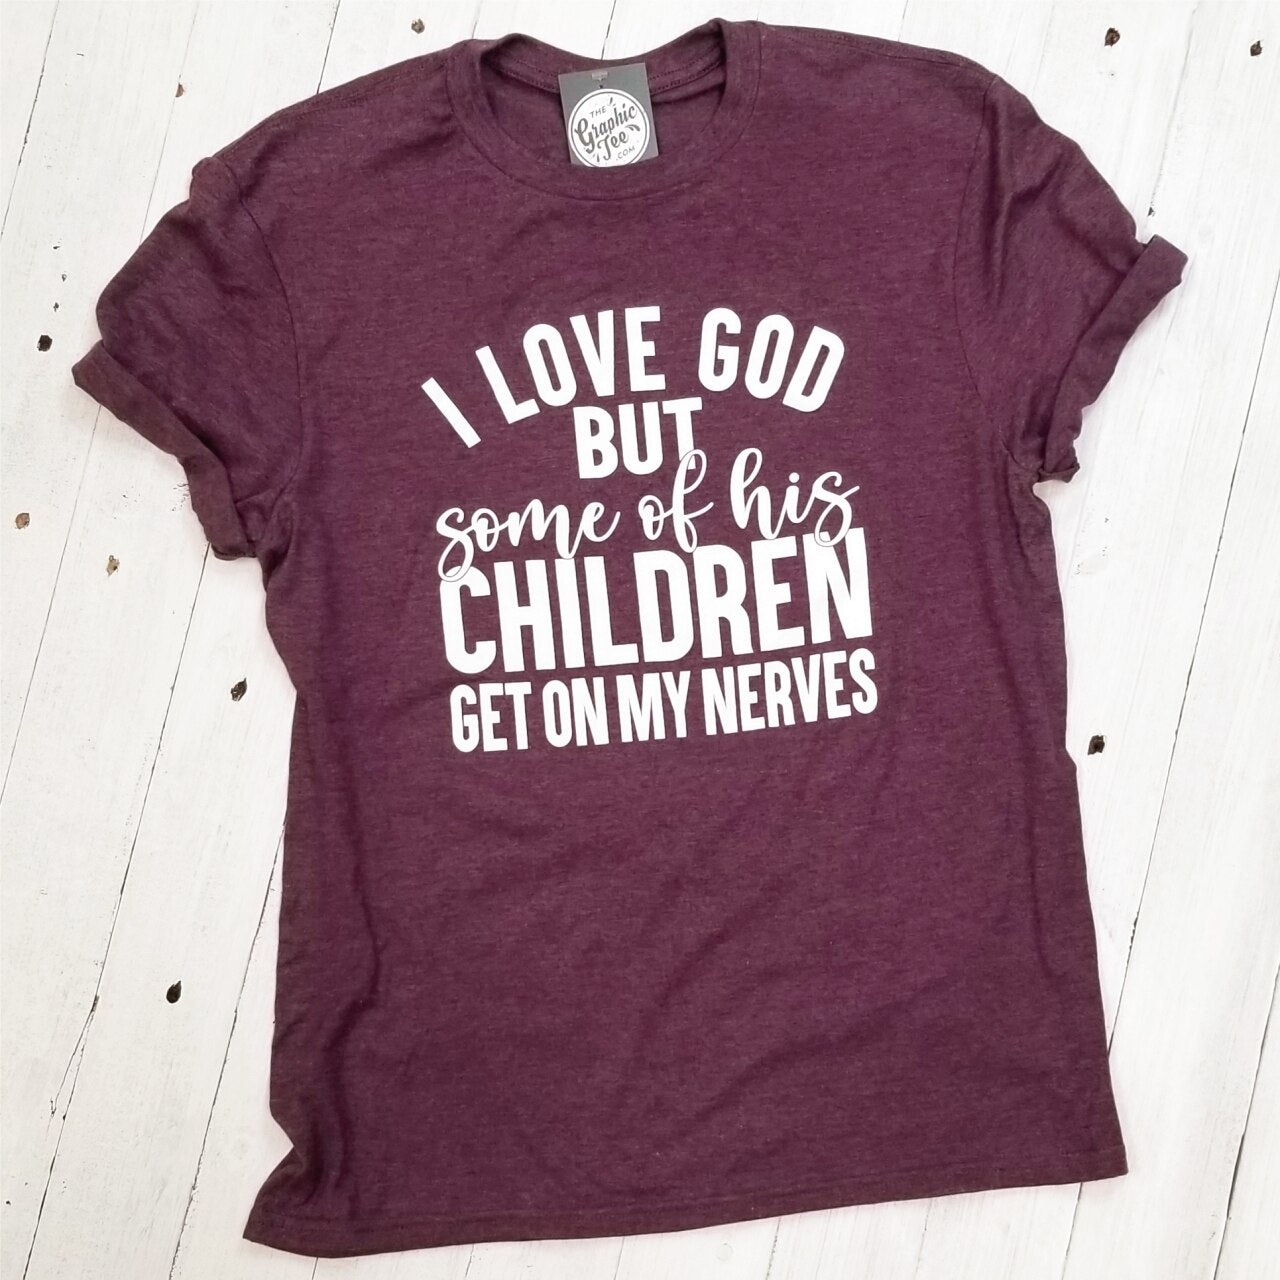 I Love God, But Some of His Children - Adult Tee - The Graphic Tee